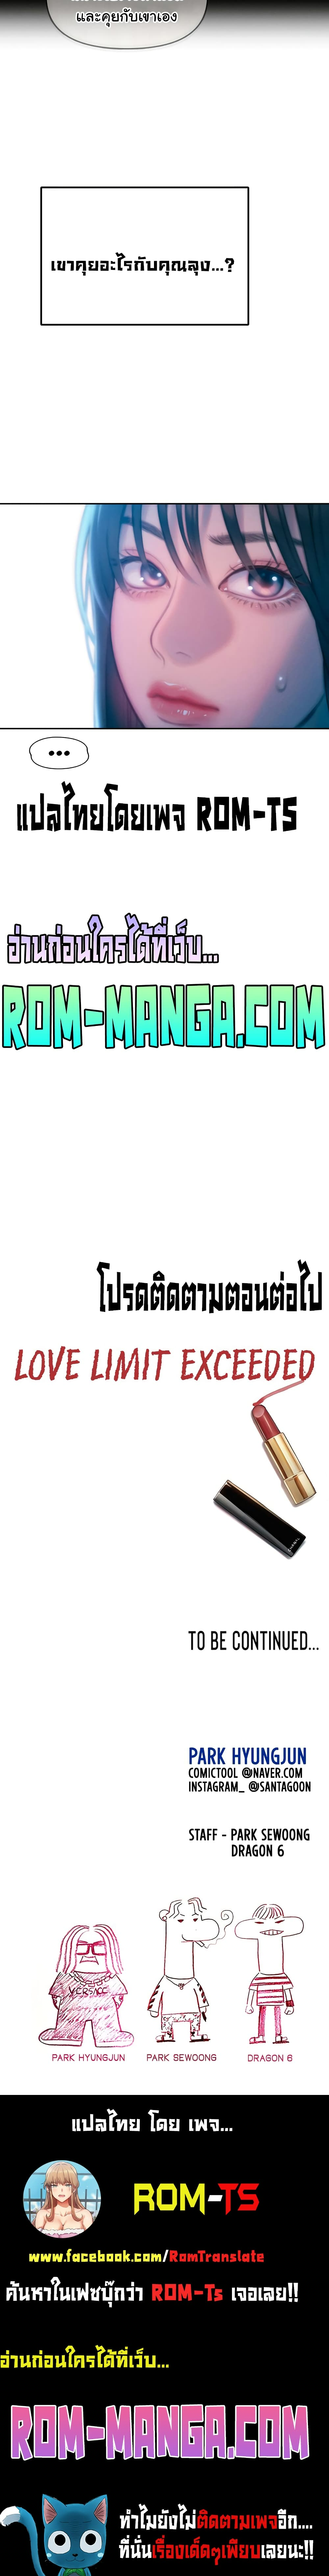 Love Limit Exceeded6